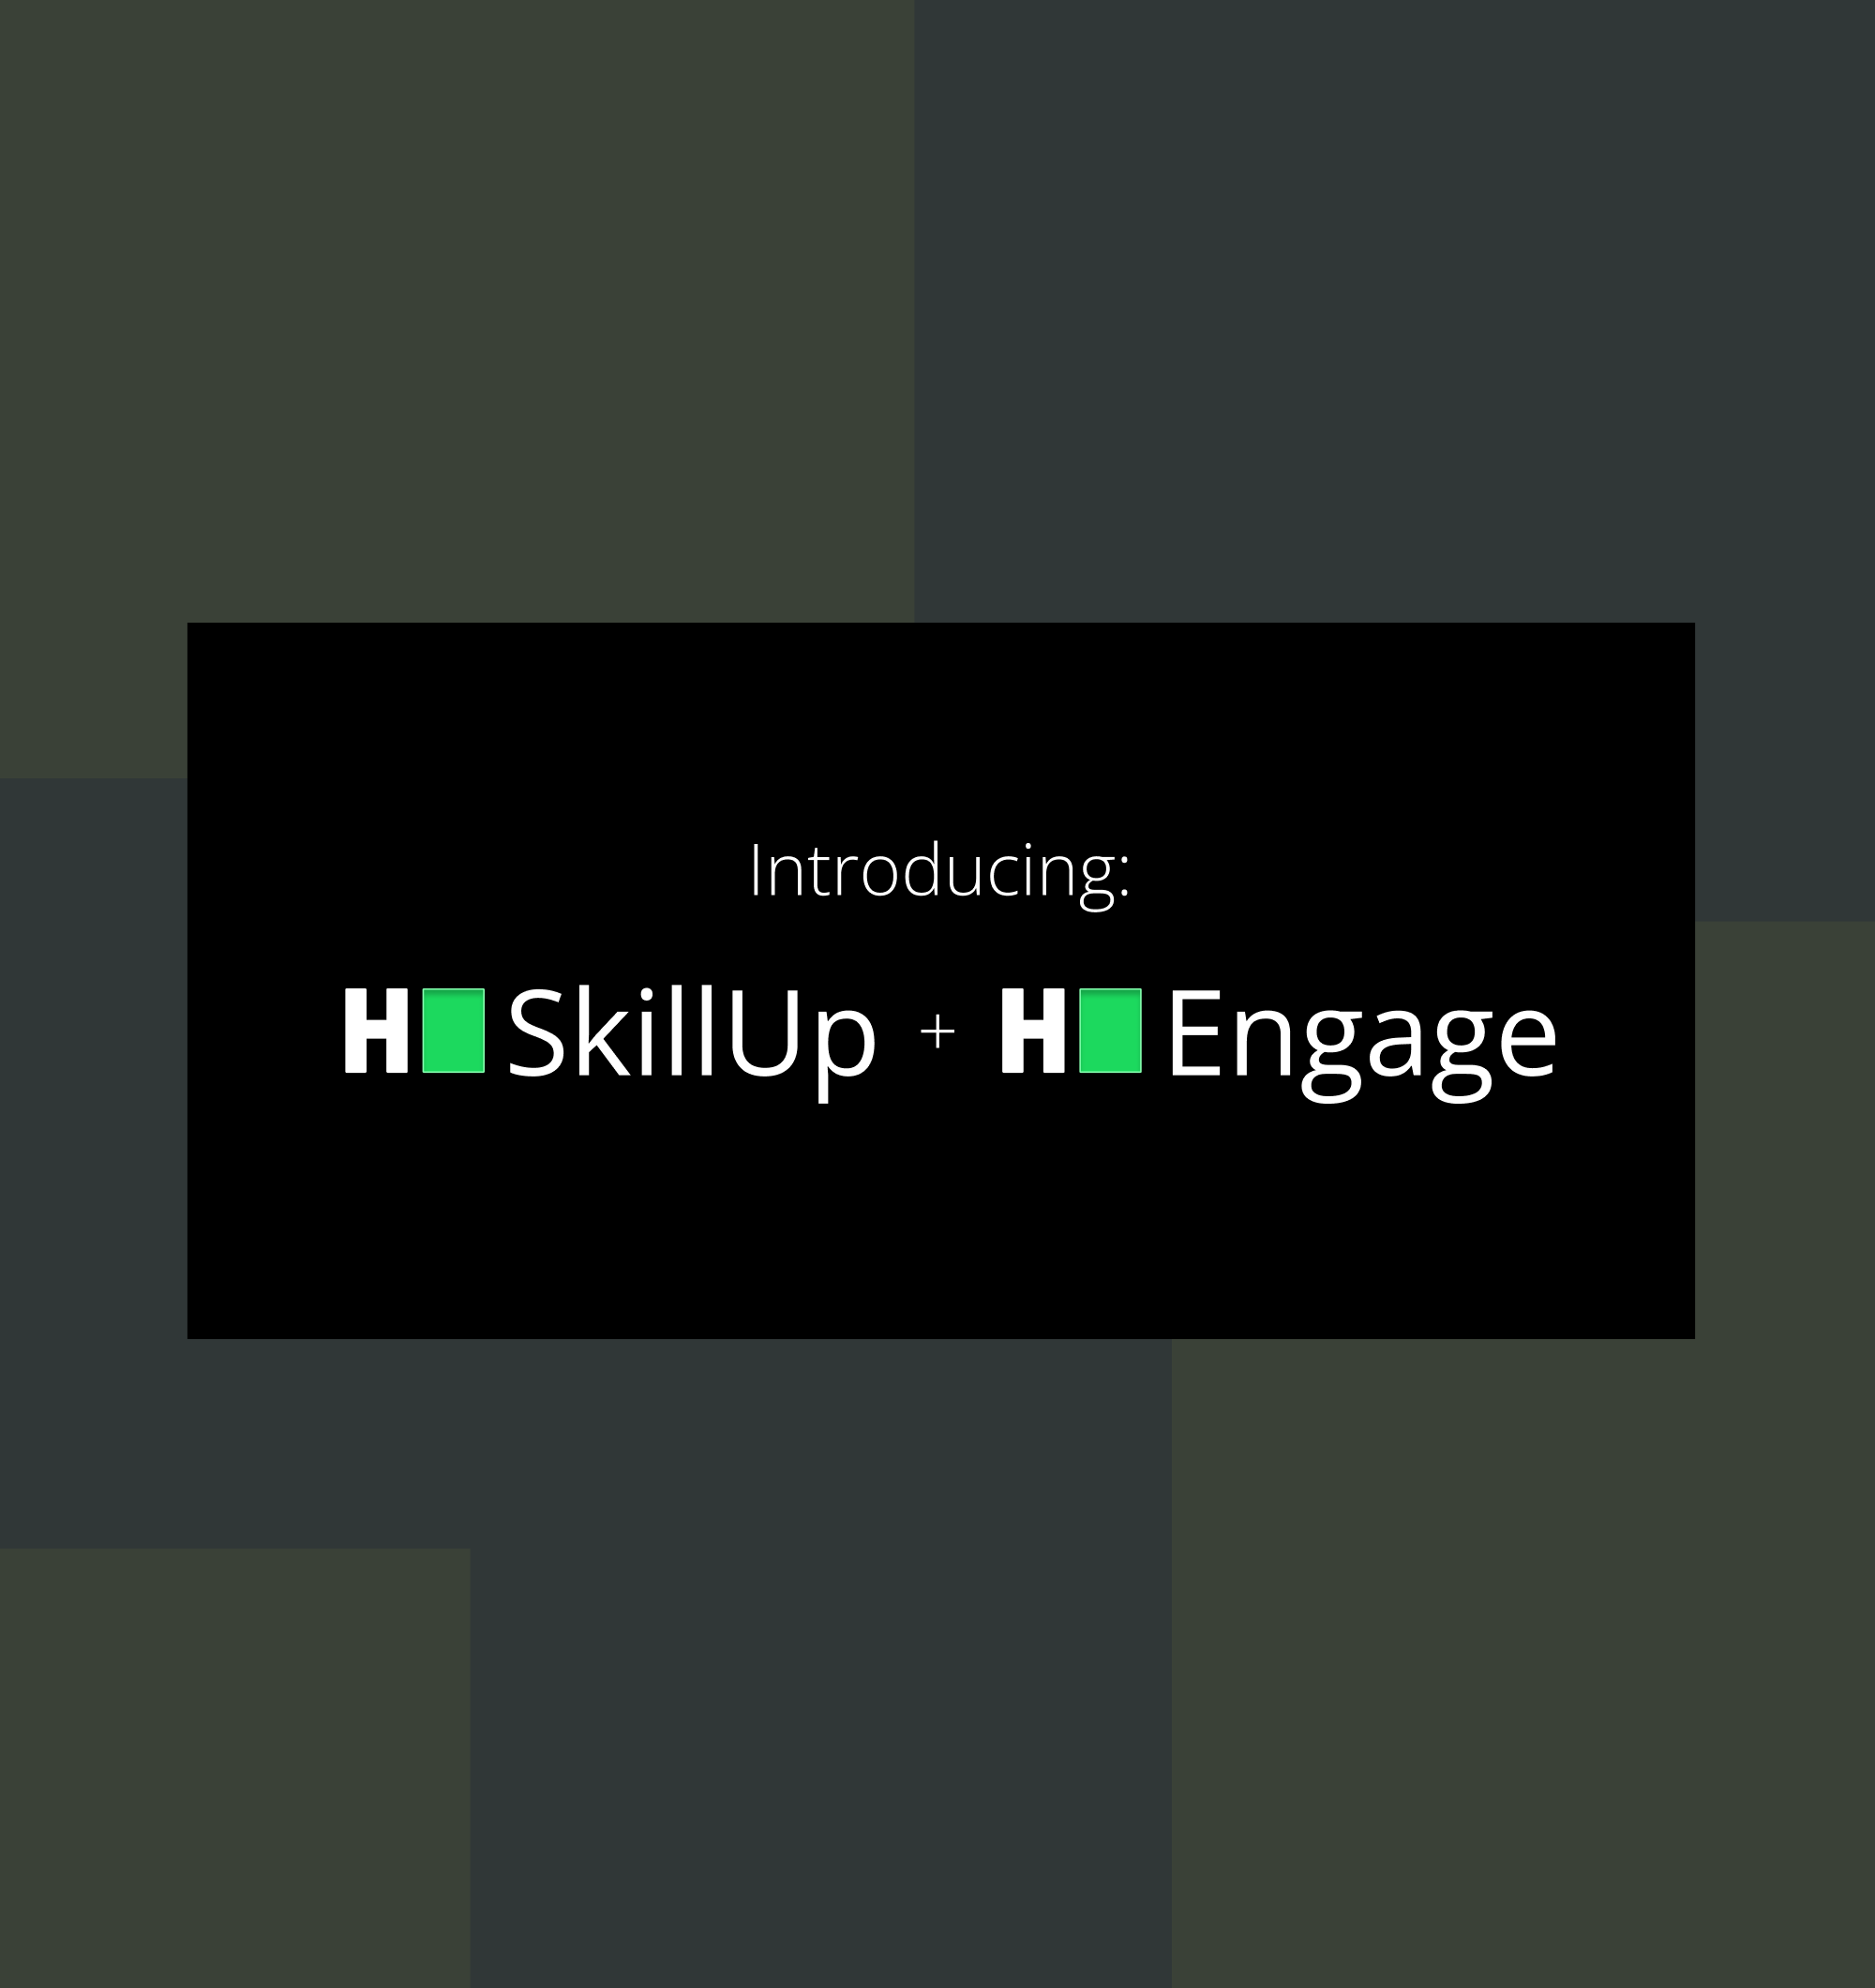 Introducing SkillUp and Engage